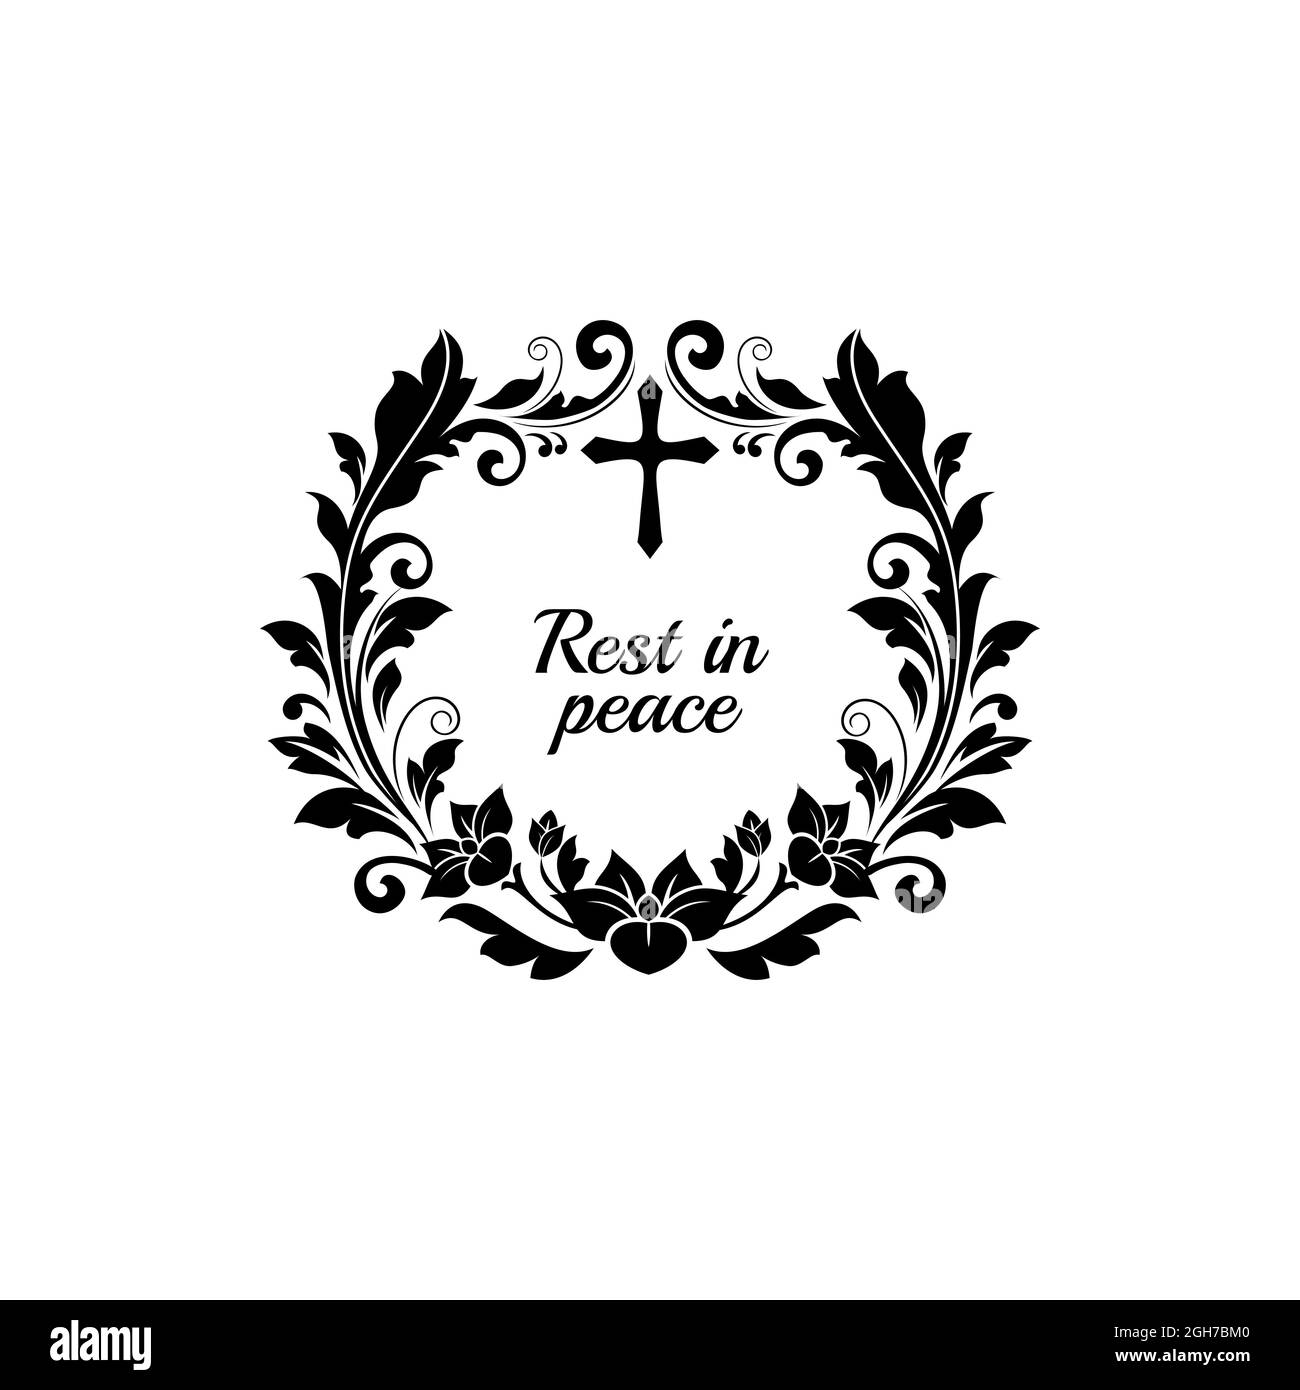 Funeral card, vector vintage condolence floral wreath with flowers, cross and flourishes. Obituary text rest in peace retro frame, obsequial memorial, Stock Vector